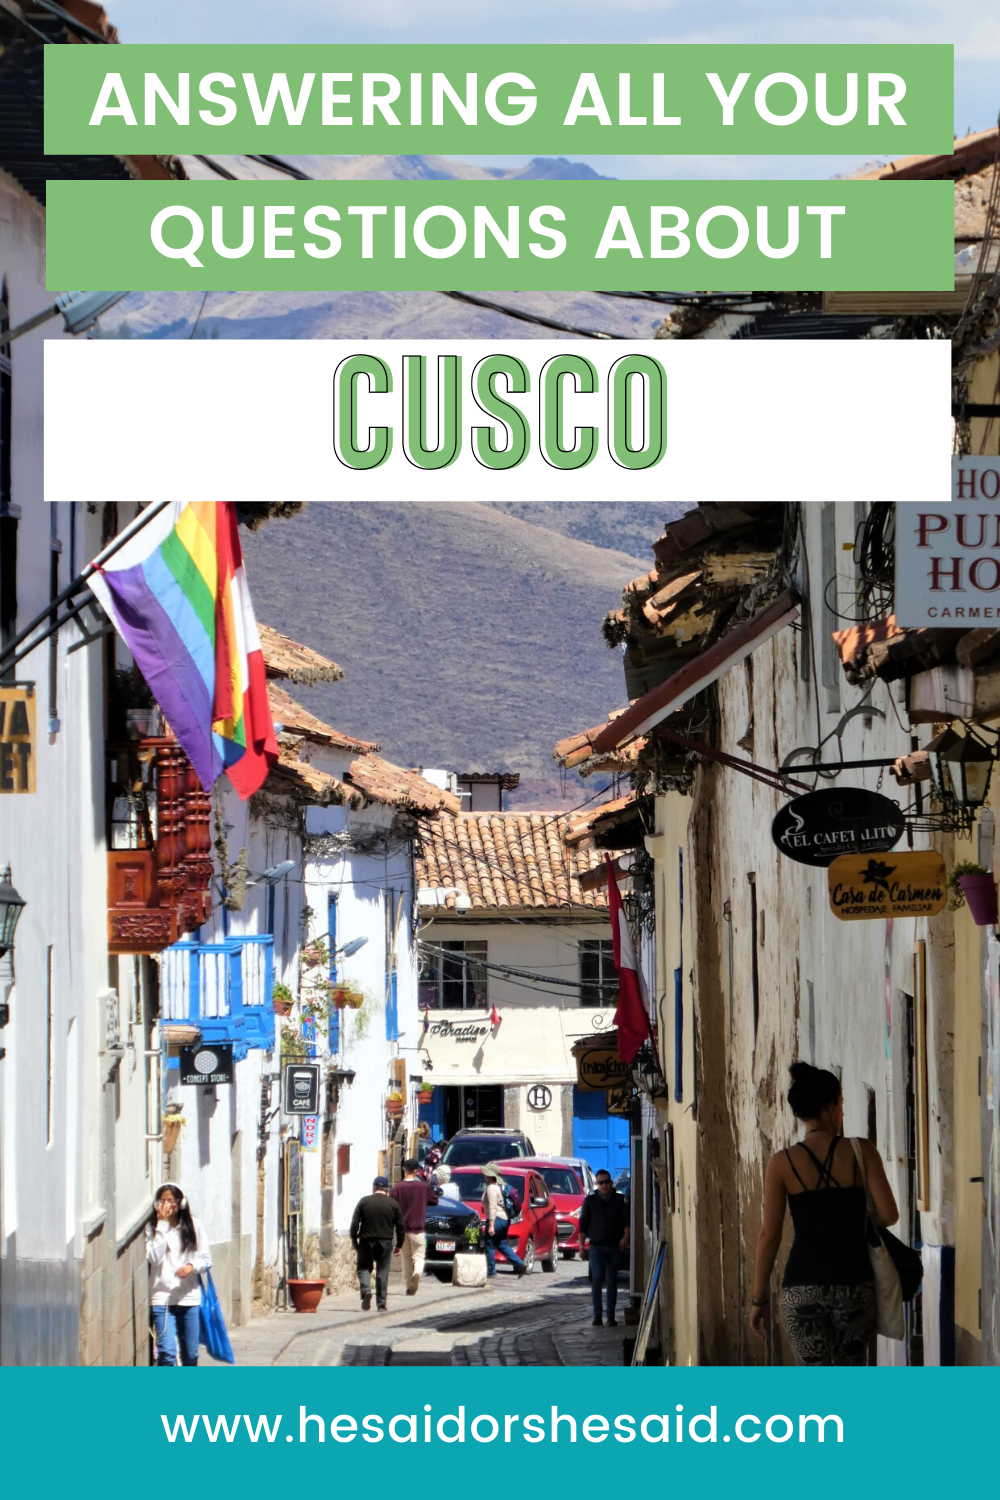 Answering all your questions about Cusco by hesaidorshesaid